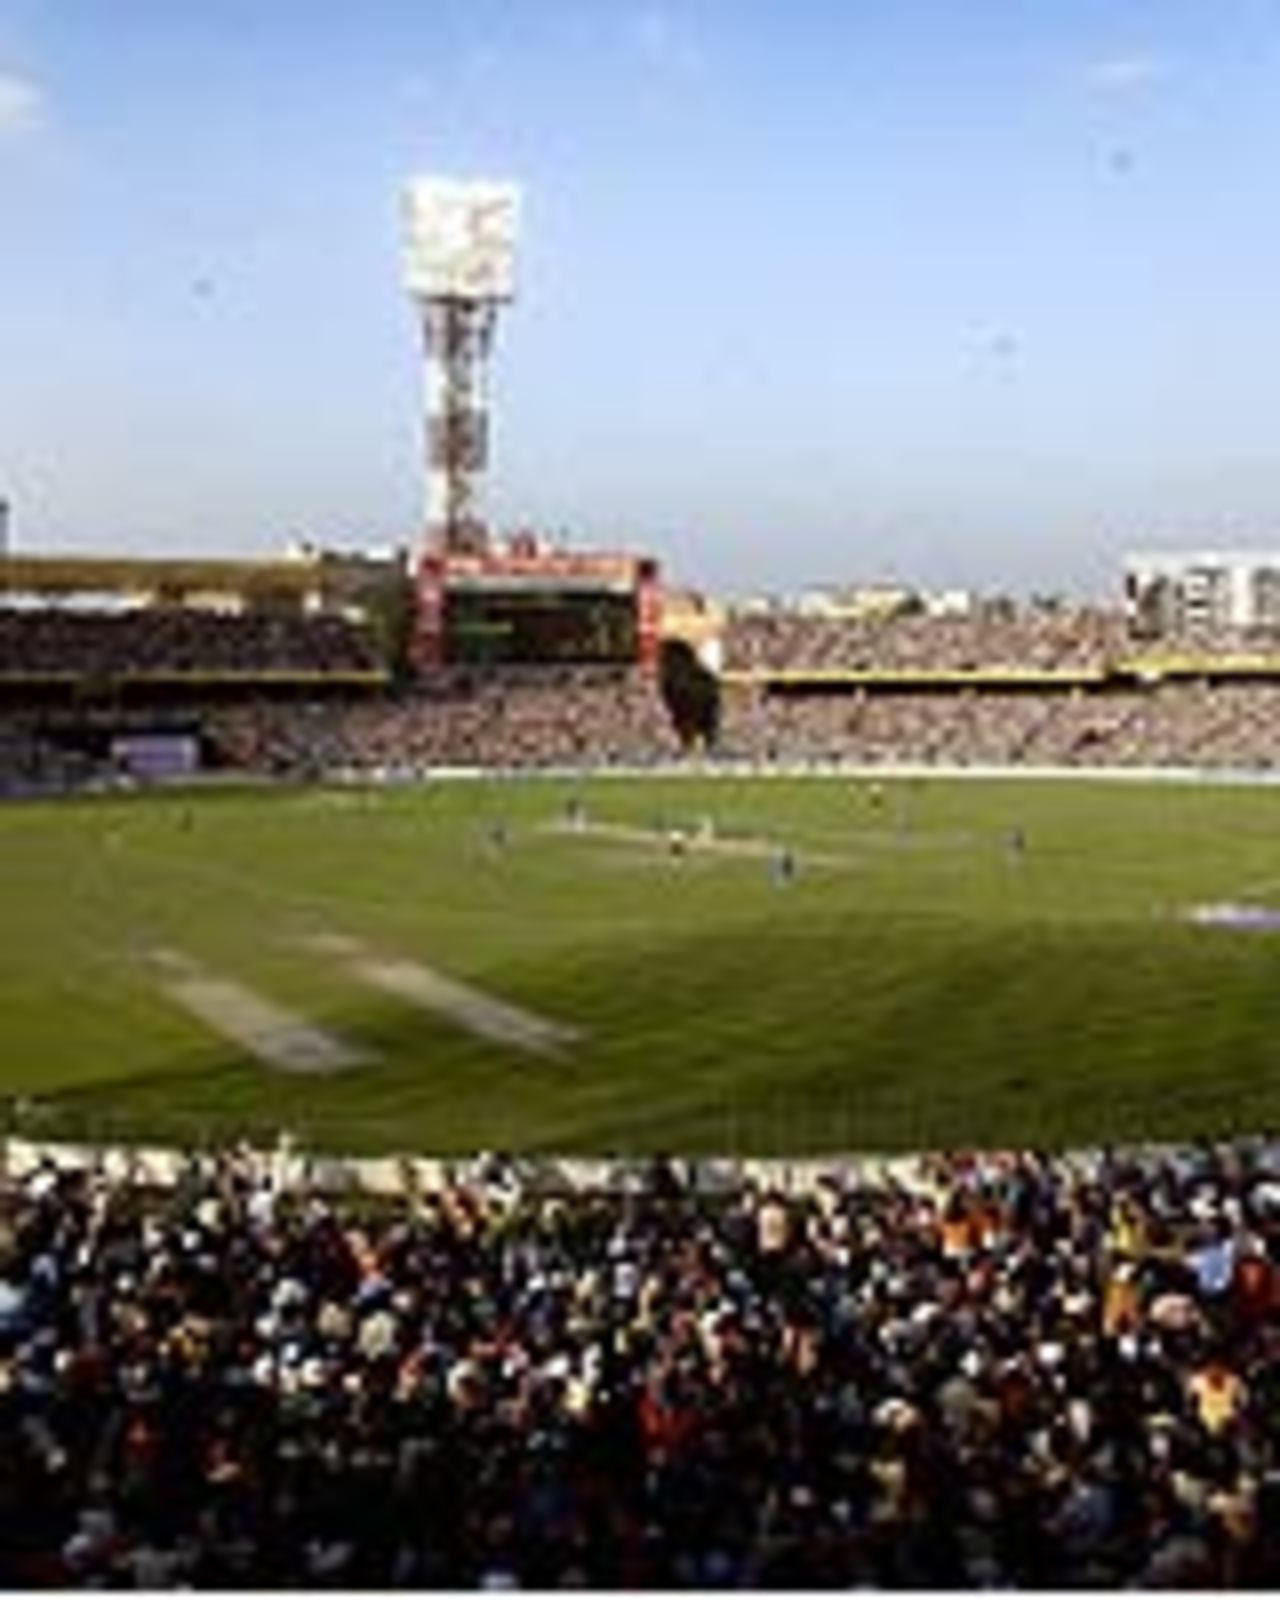 A general view of the ground during the 1st India v England One Day International match at Eden Gardens Cricket Stadium, Kolkata, India